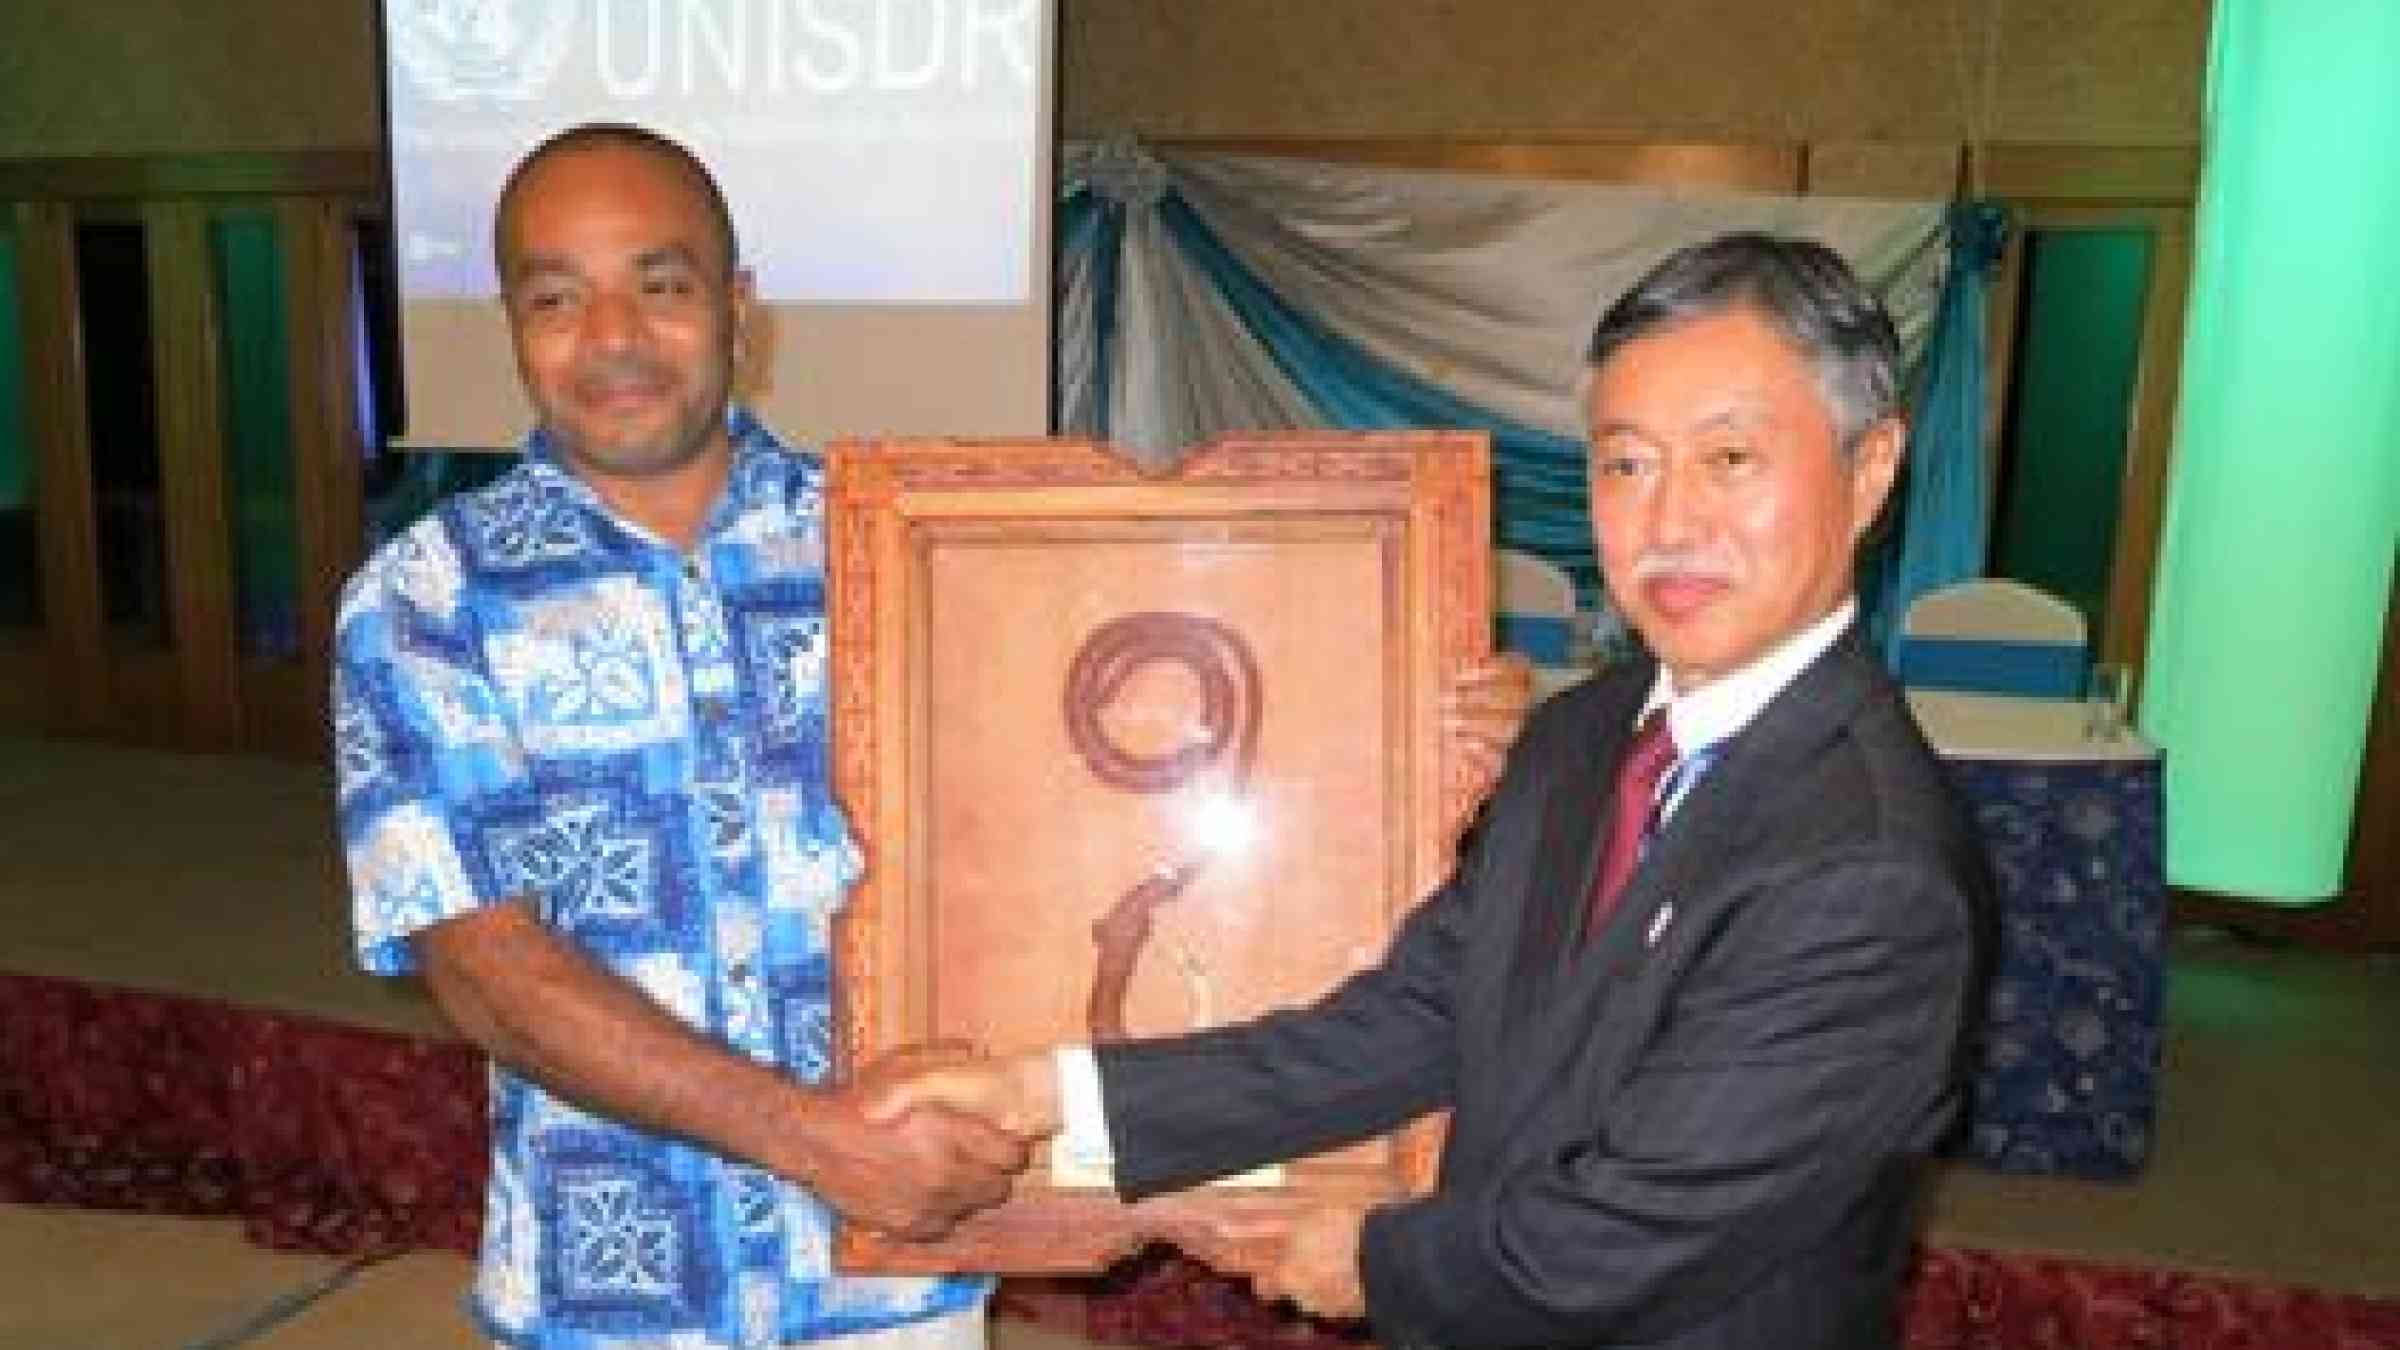 Neori Lagi (left) of the Pacific Disability Forum receives a Pacific Innovation & Leadership Award for Resilience (PILAR) from H.E. Kenichi Suganuma, Japan’s Ambassador for the Third UN World Conference on Disaster Risk Reduction. (Photo: UNISDR)